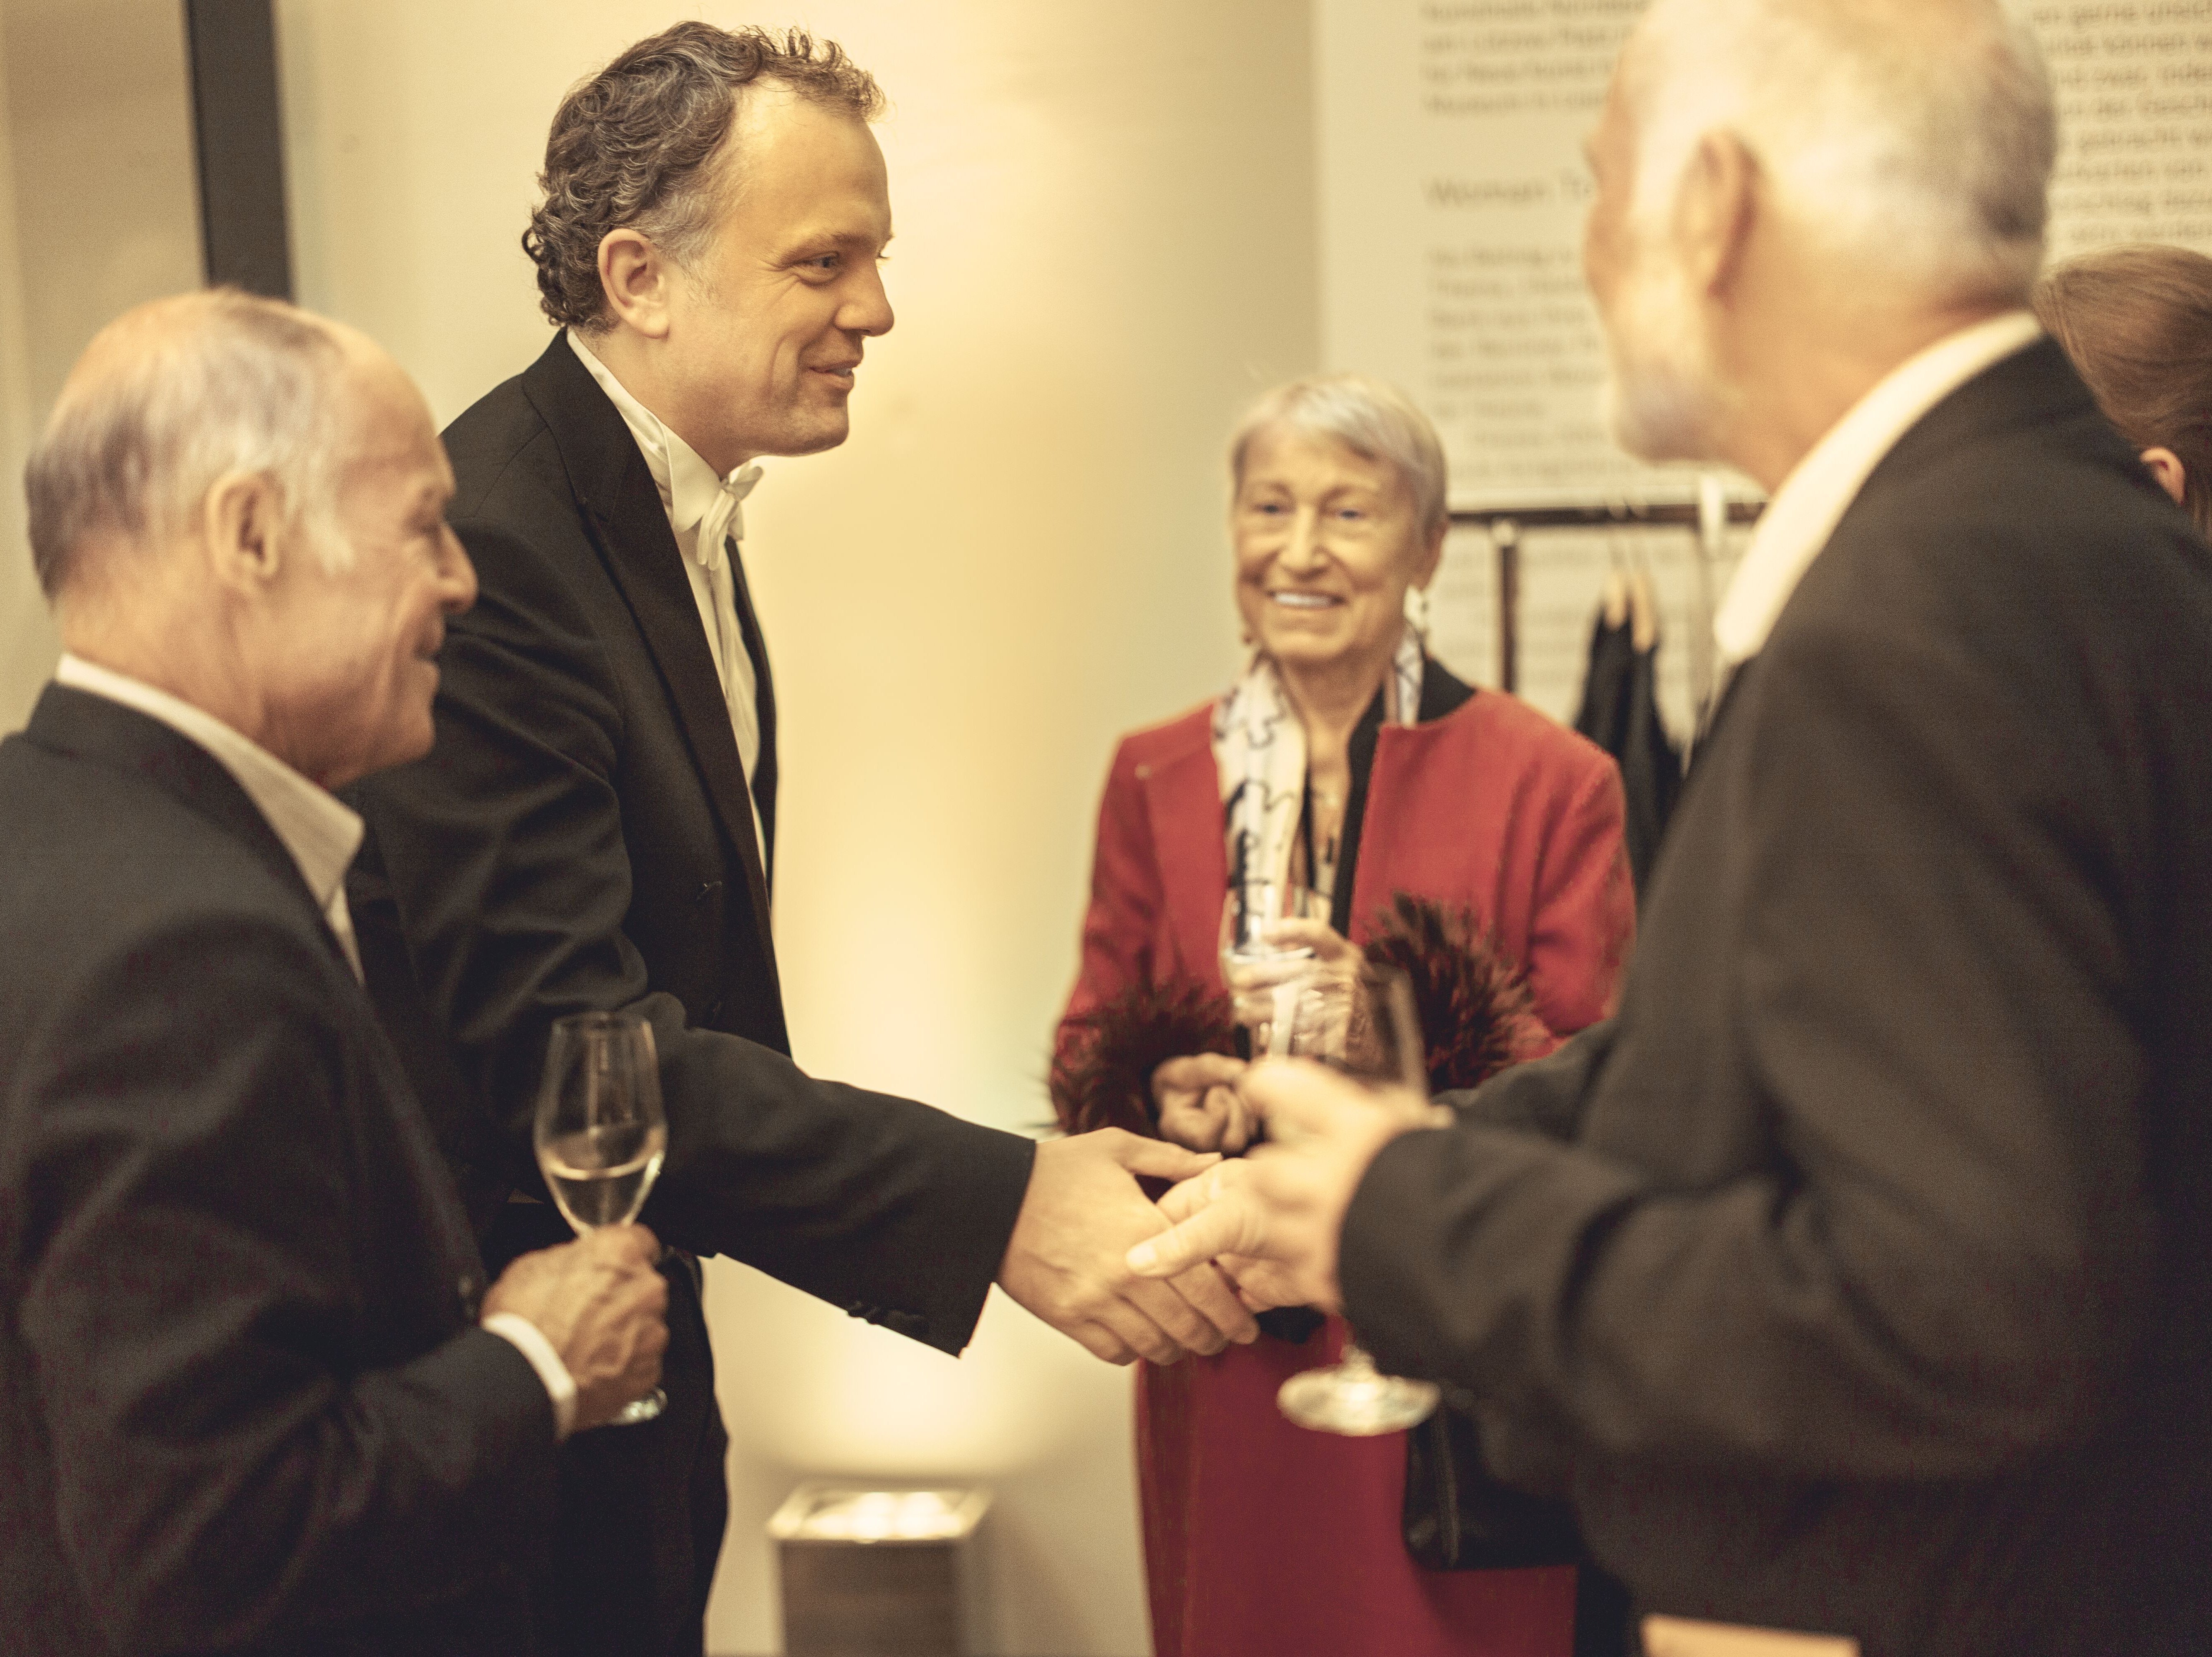 People stand together with a glass of champagne. A man shakes hands with someone